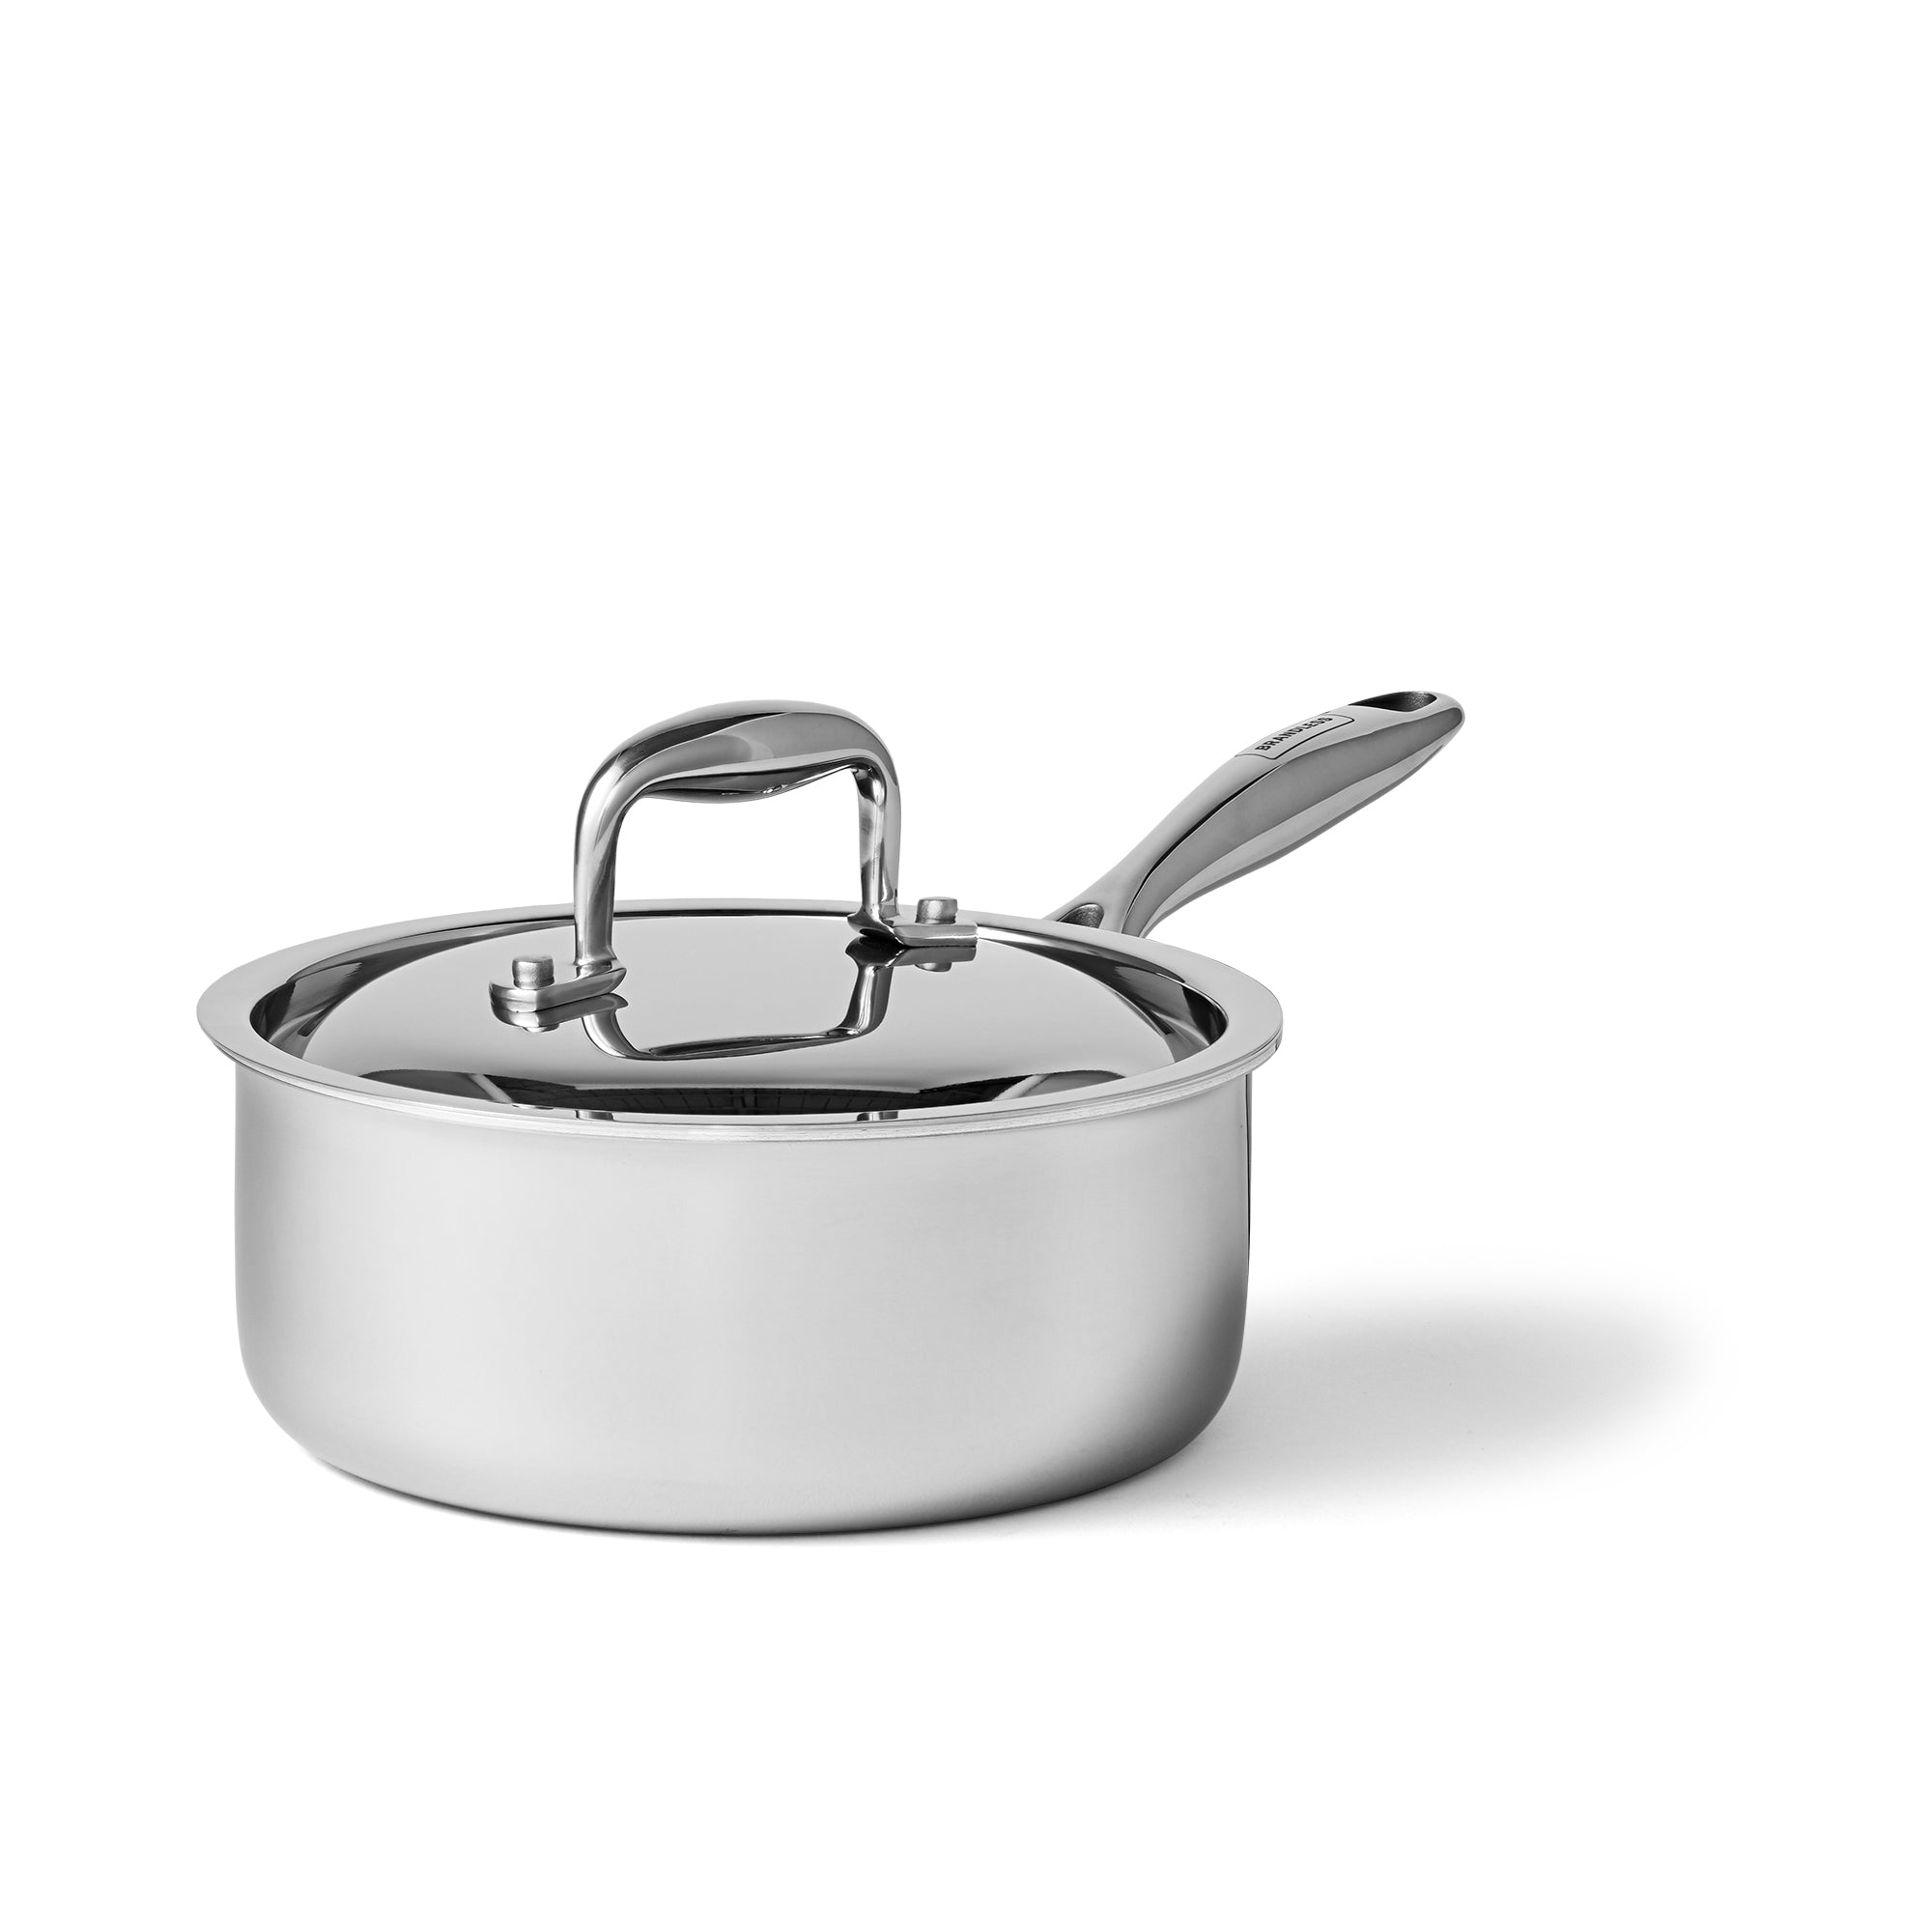 Product photo of 2 quart sauce pan with lid on white background.